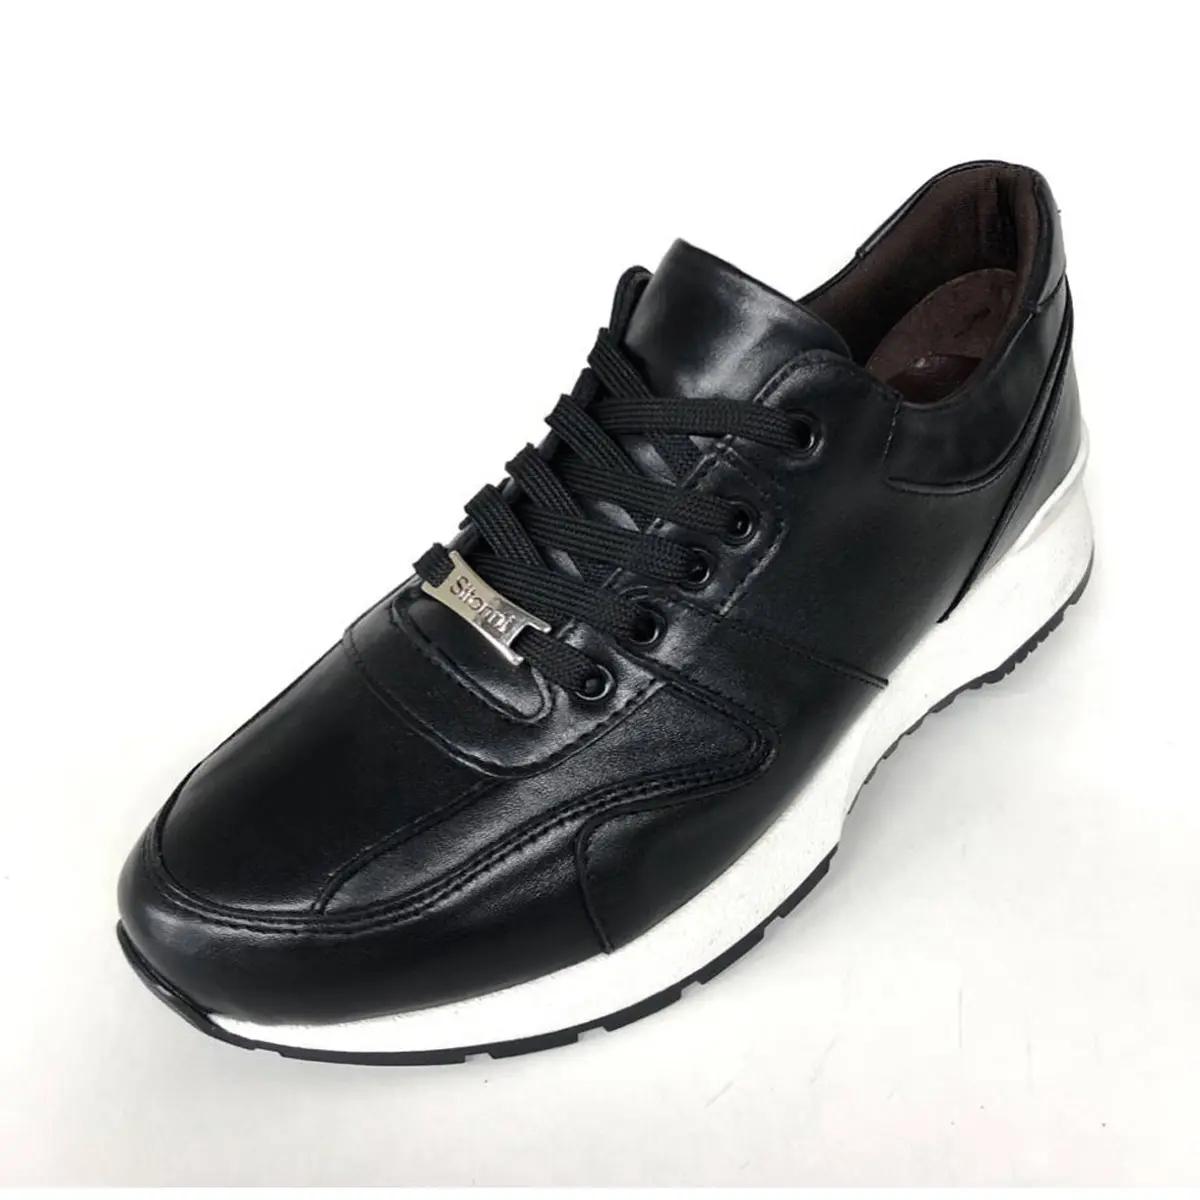 Men's leather shoes casual style wholesale prices various kinds of shoes for sale